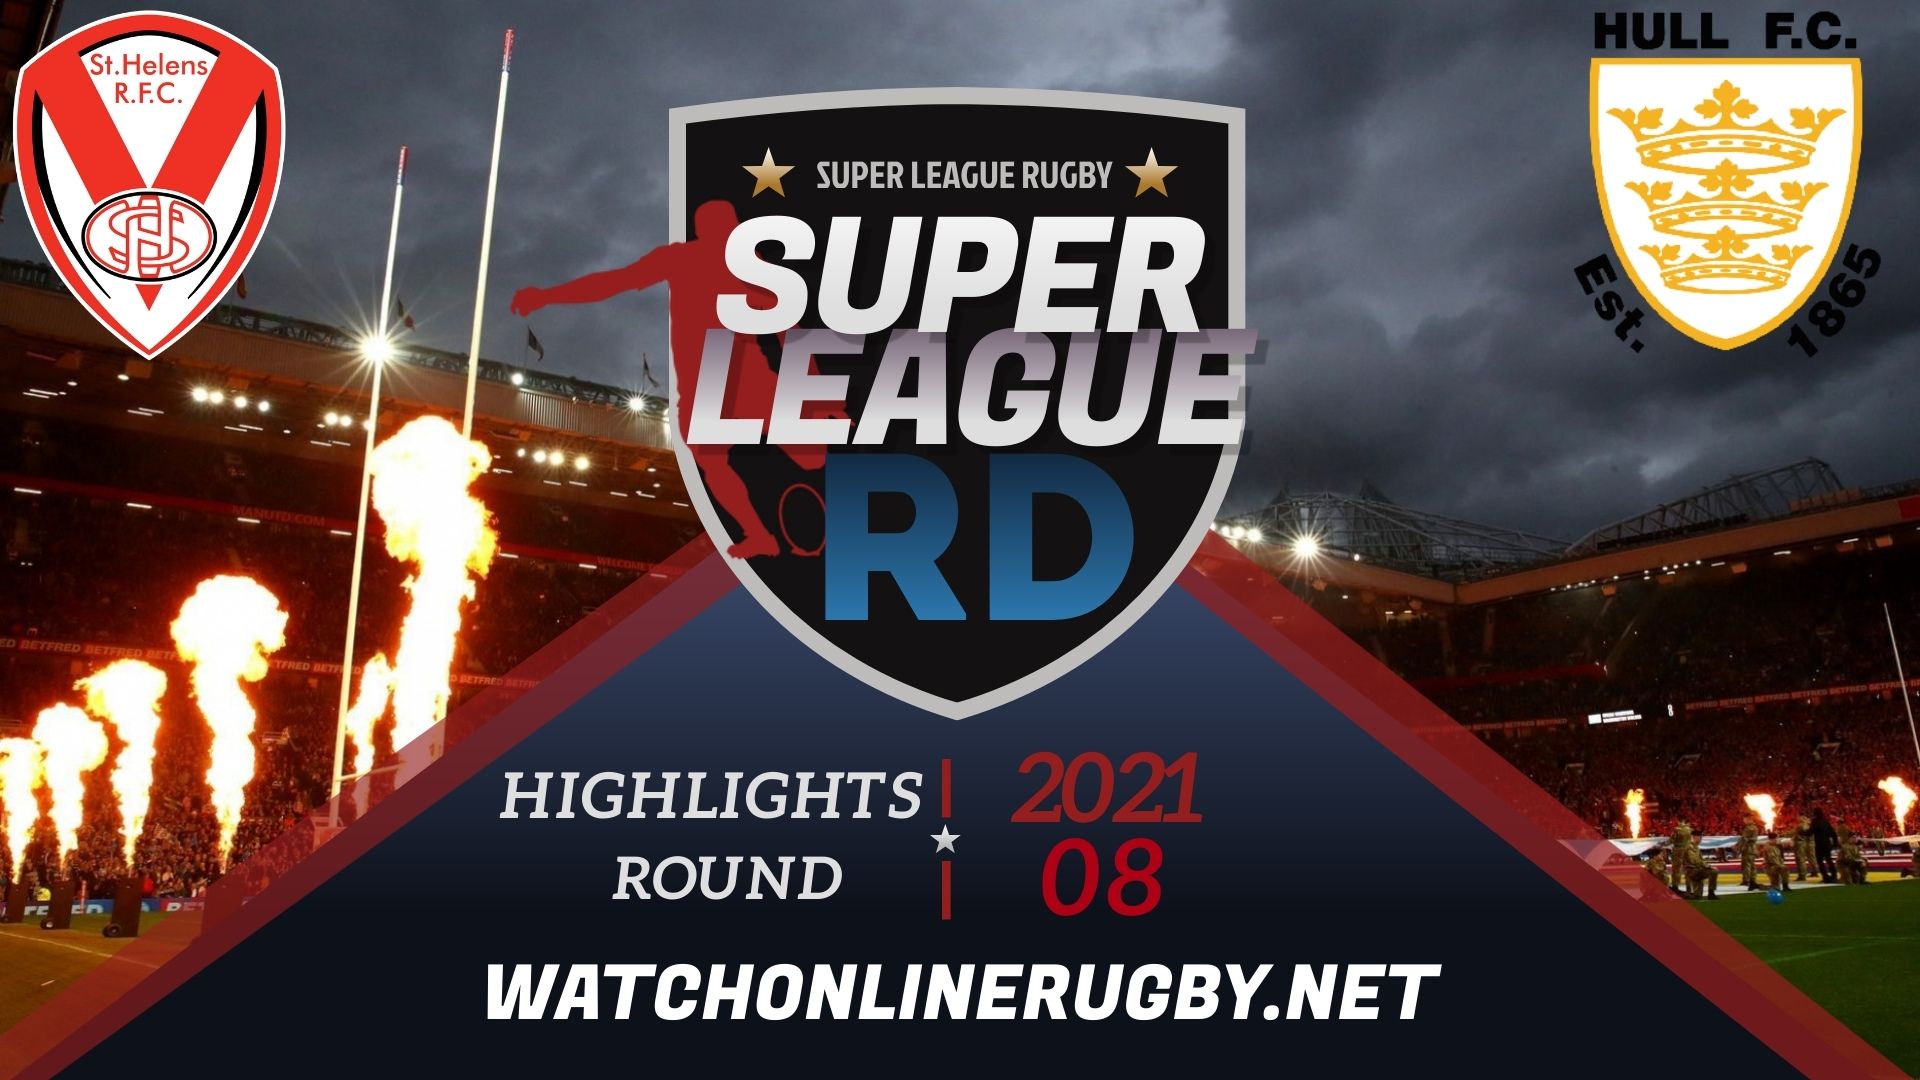 St Helens Vs Hull FC Super League Rugby 2021 RD 8